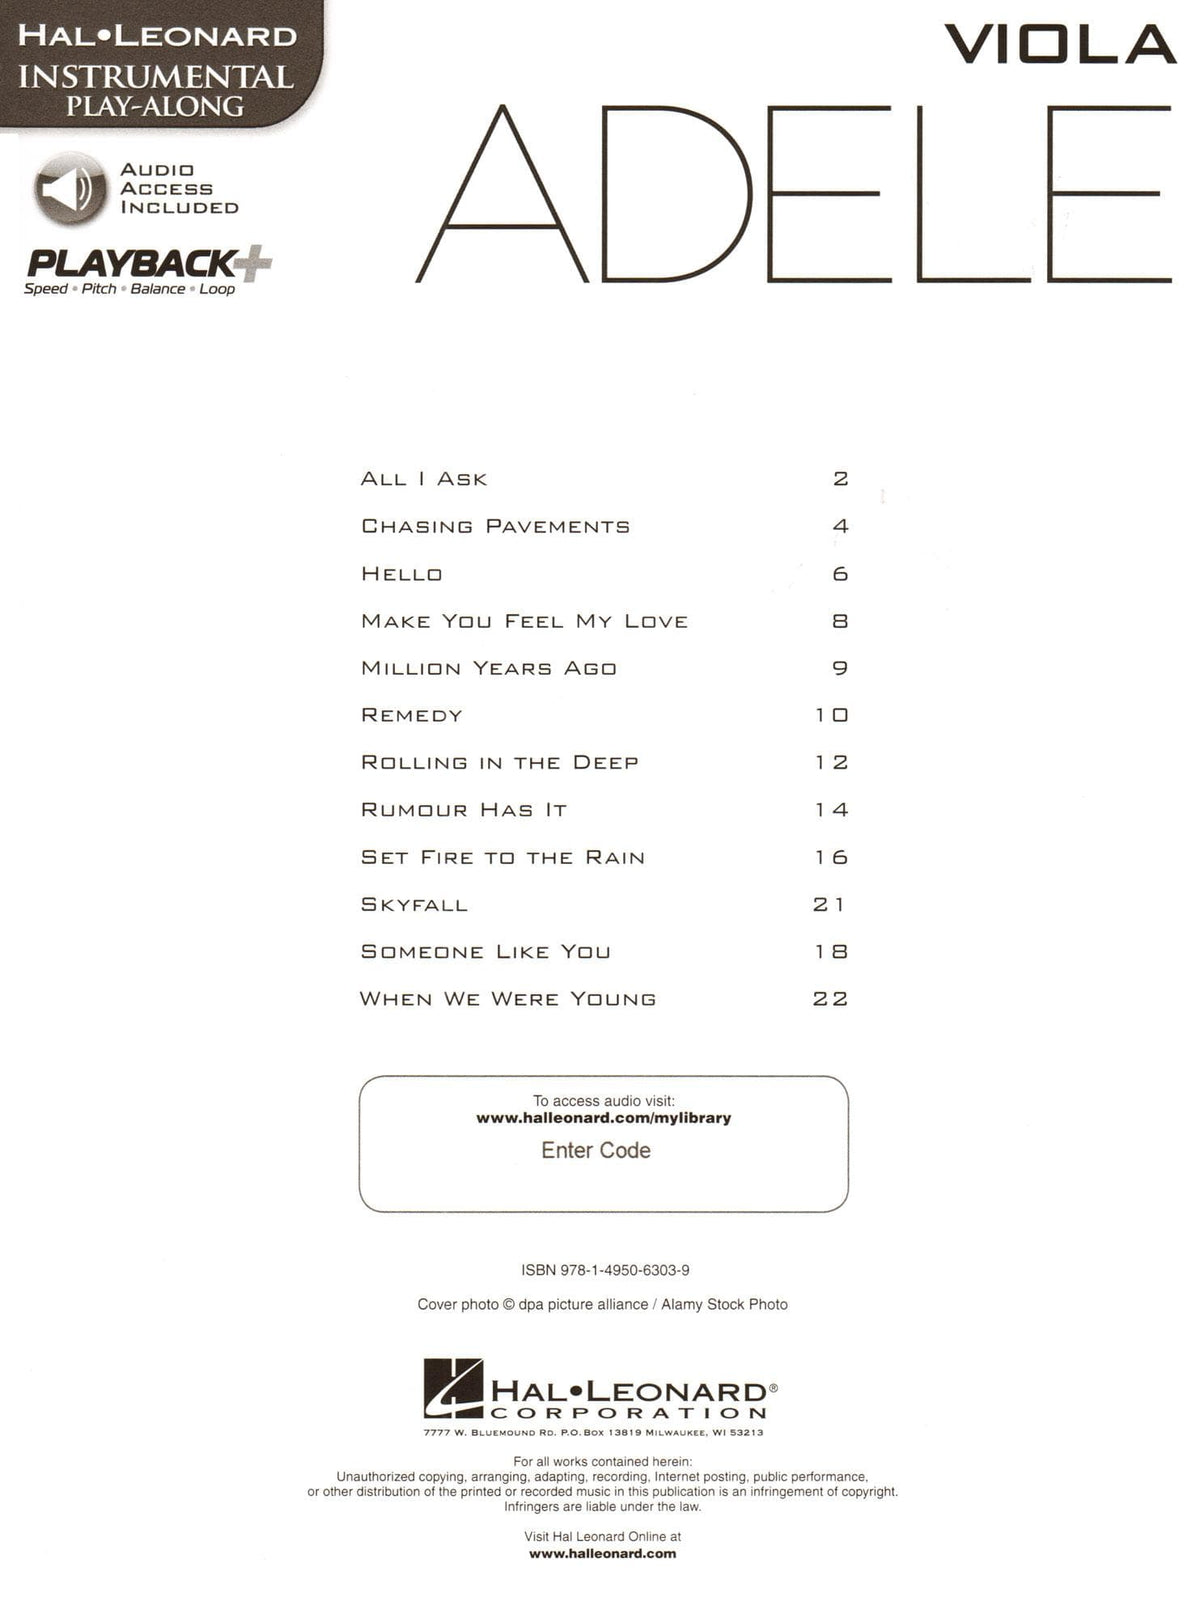 Adele - Instrumental Play-Along - for Viola with Audio Access Included - Hal Leonard